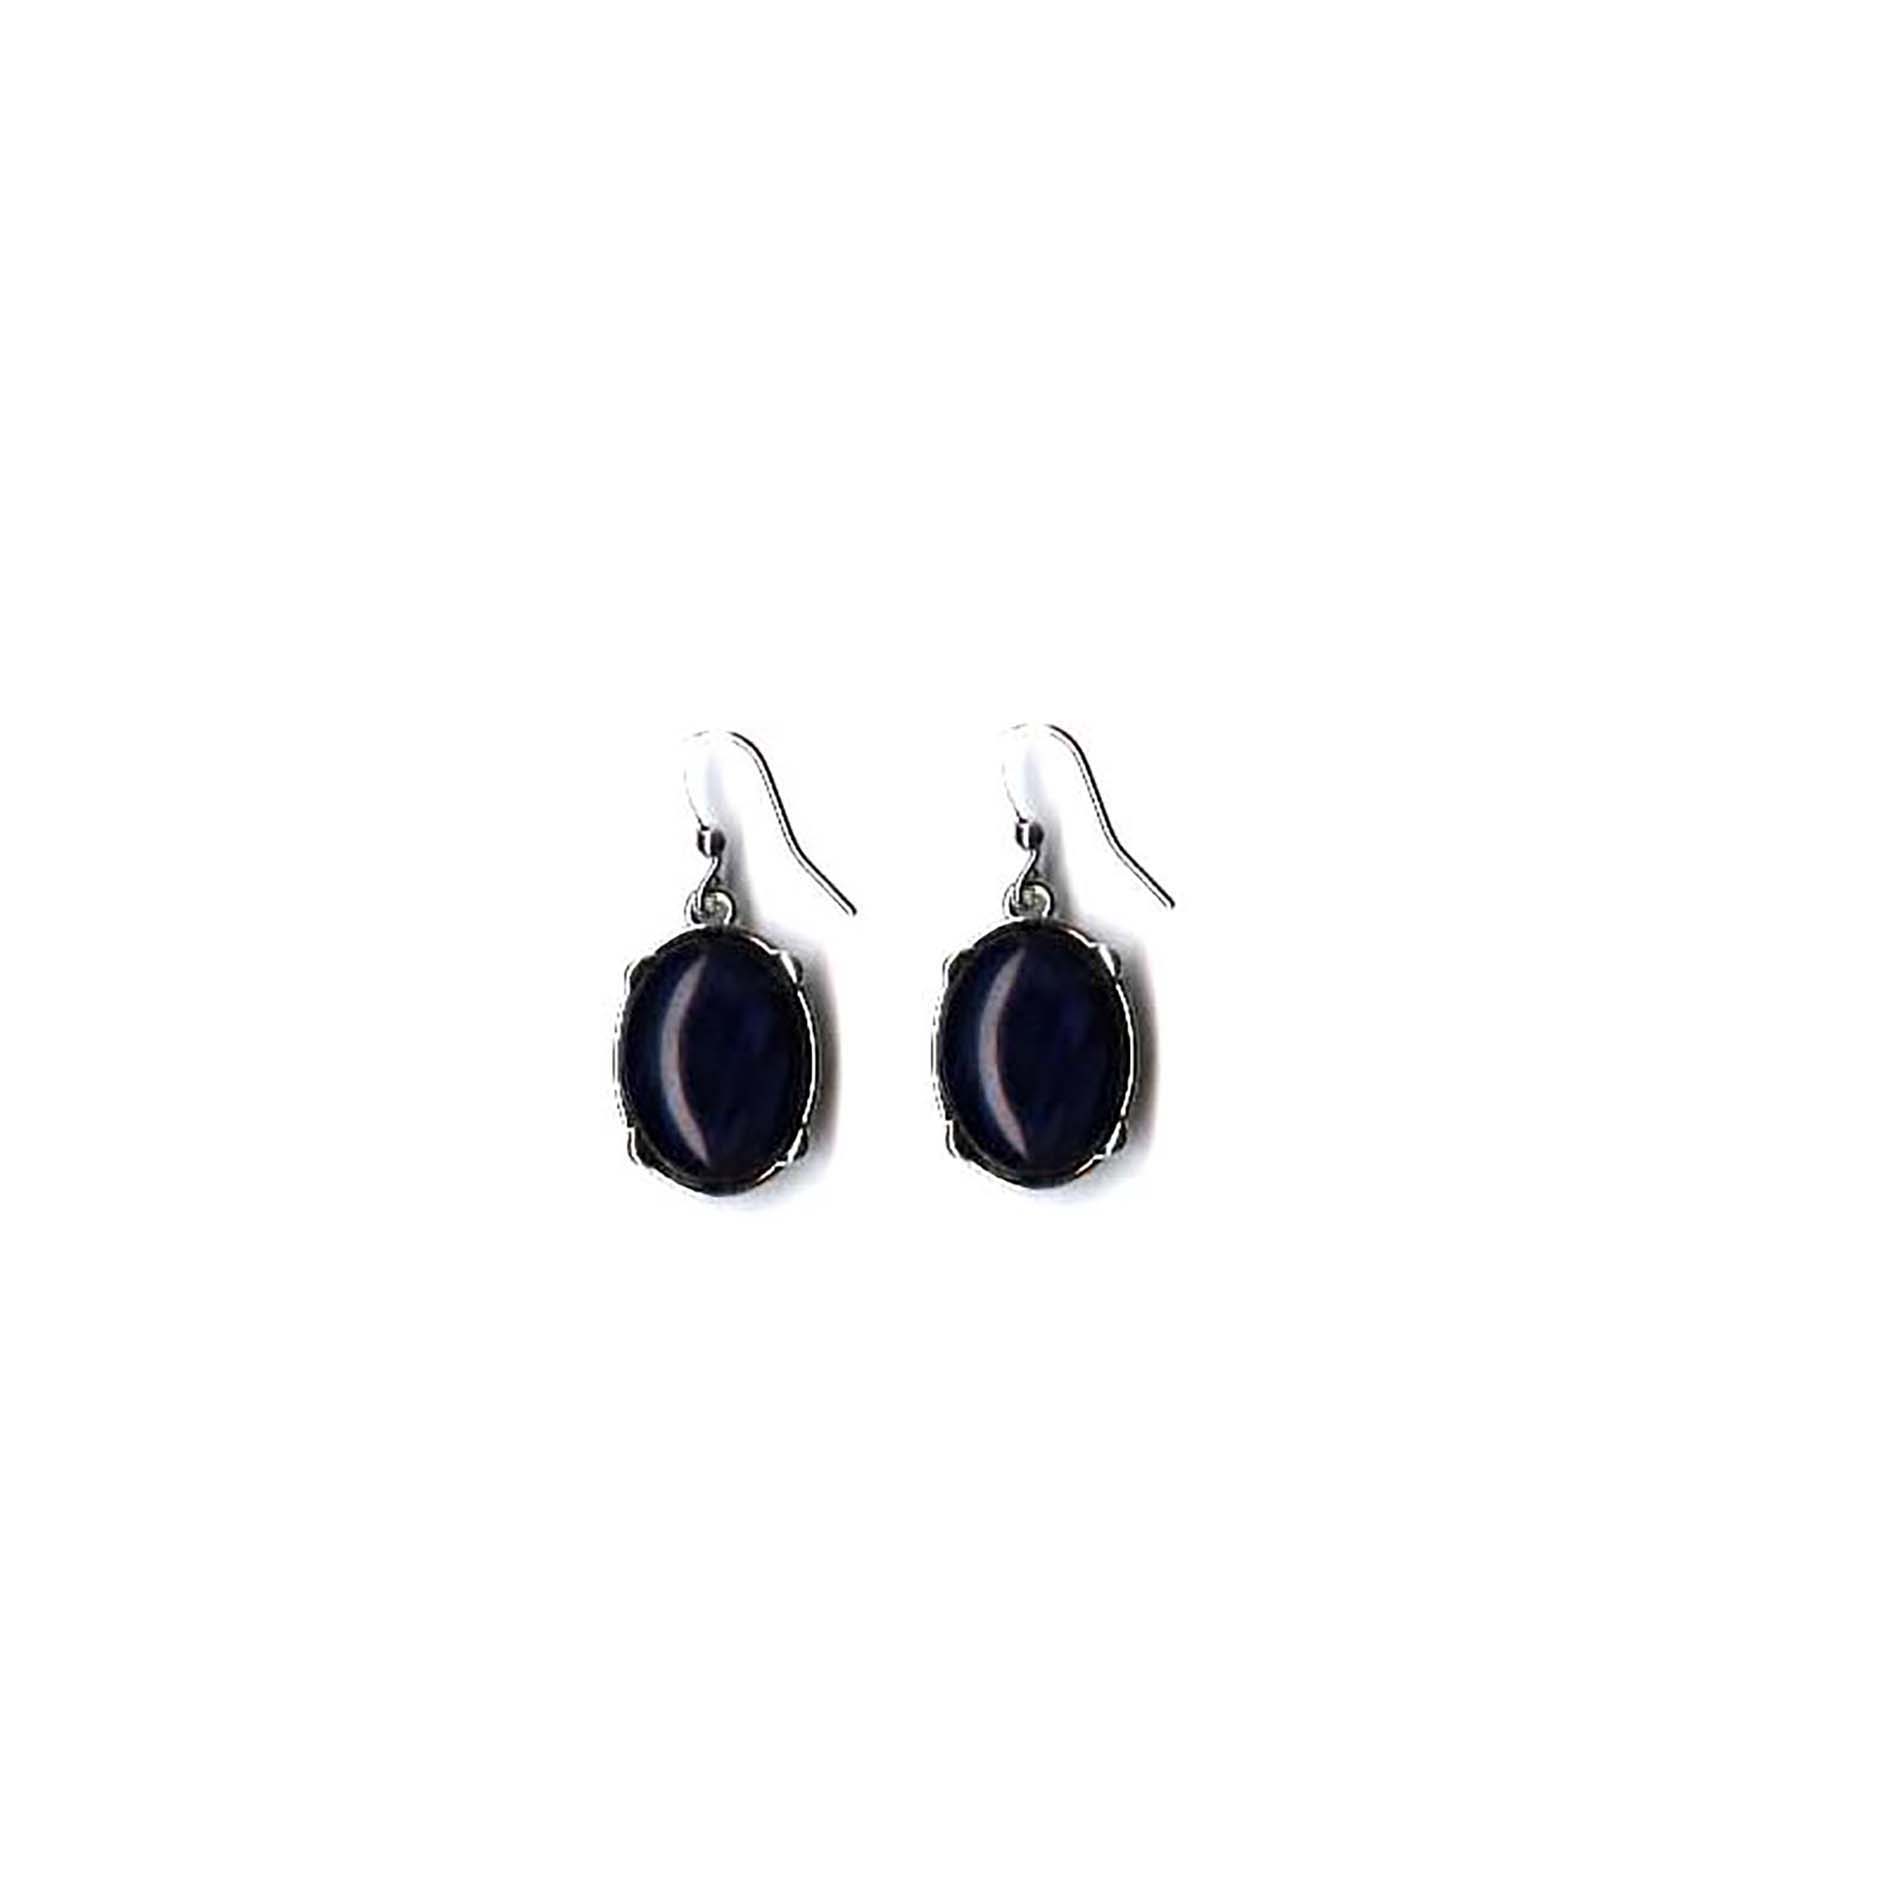 Attention Oval Cab Drop Earrings